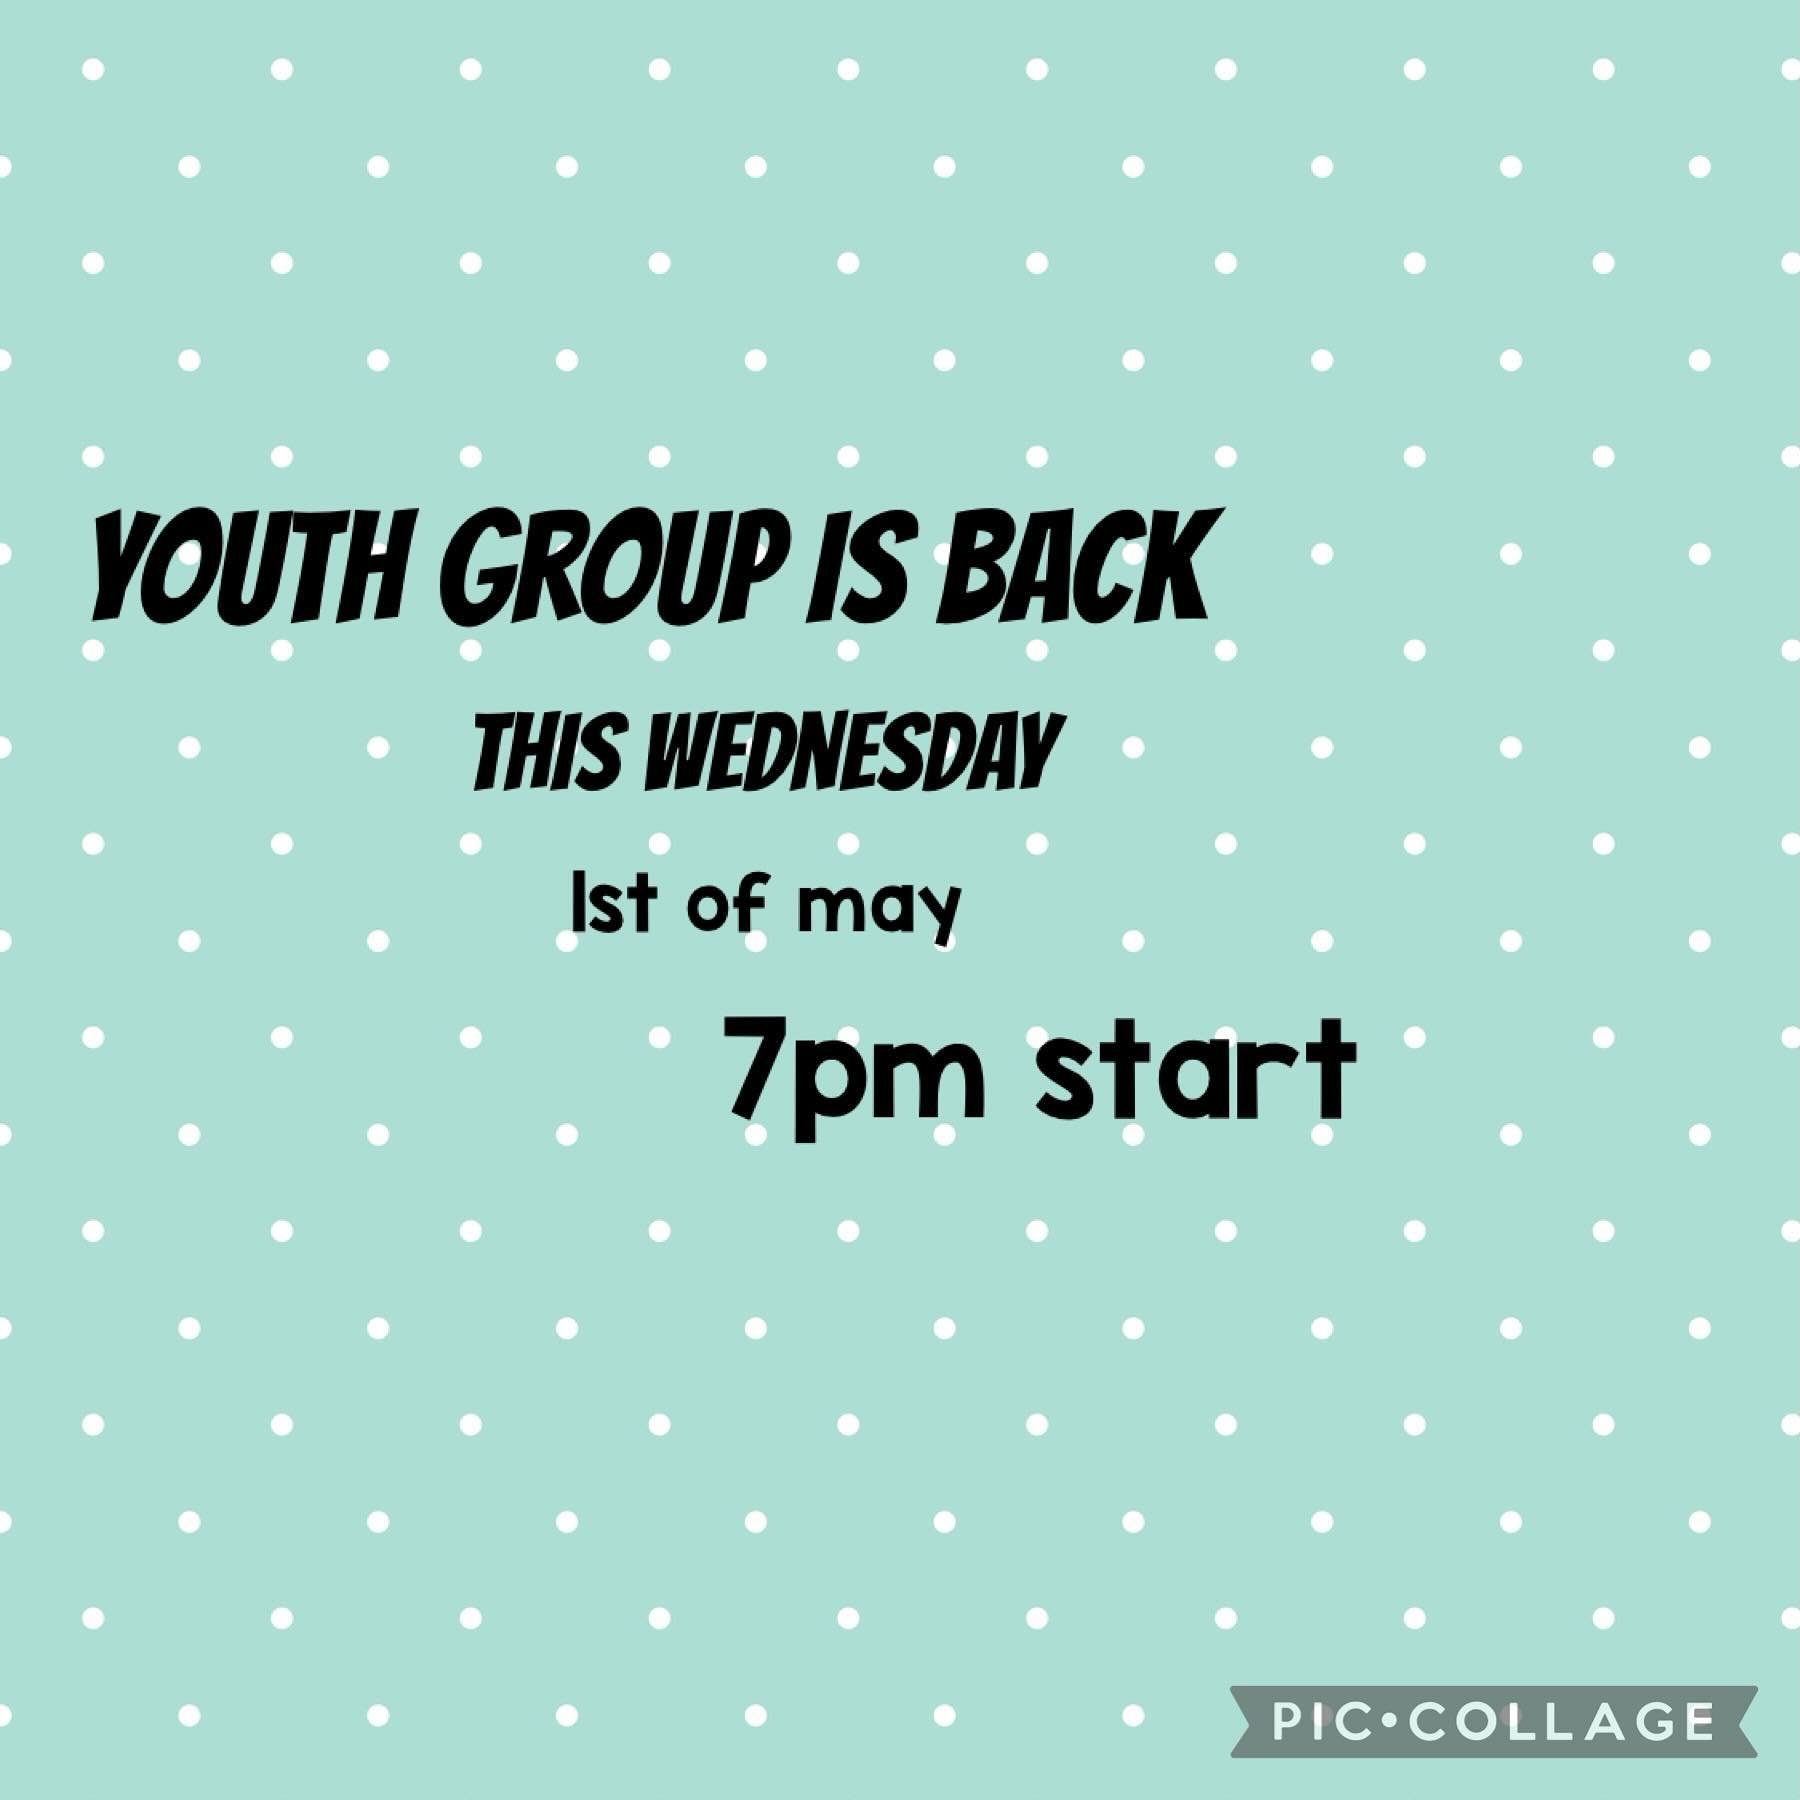 YOUTH GROUP IS BACK THIS WEEK!
7pm start, doors lock @7:30!